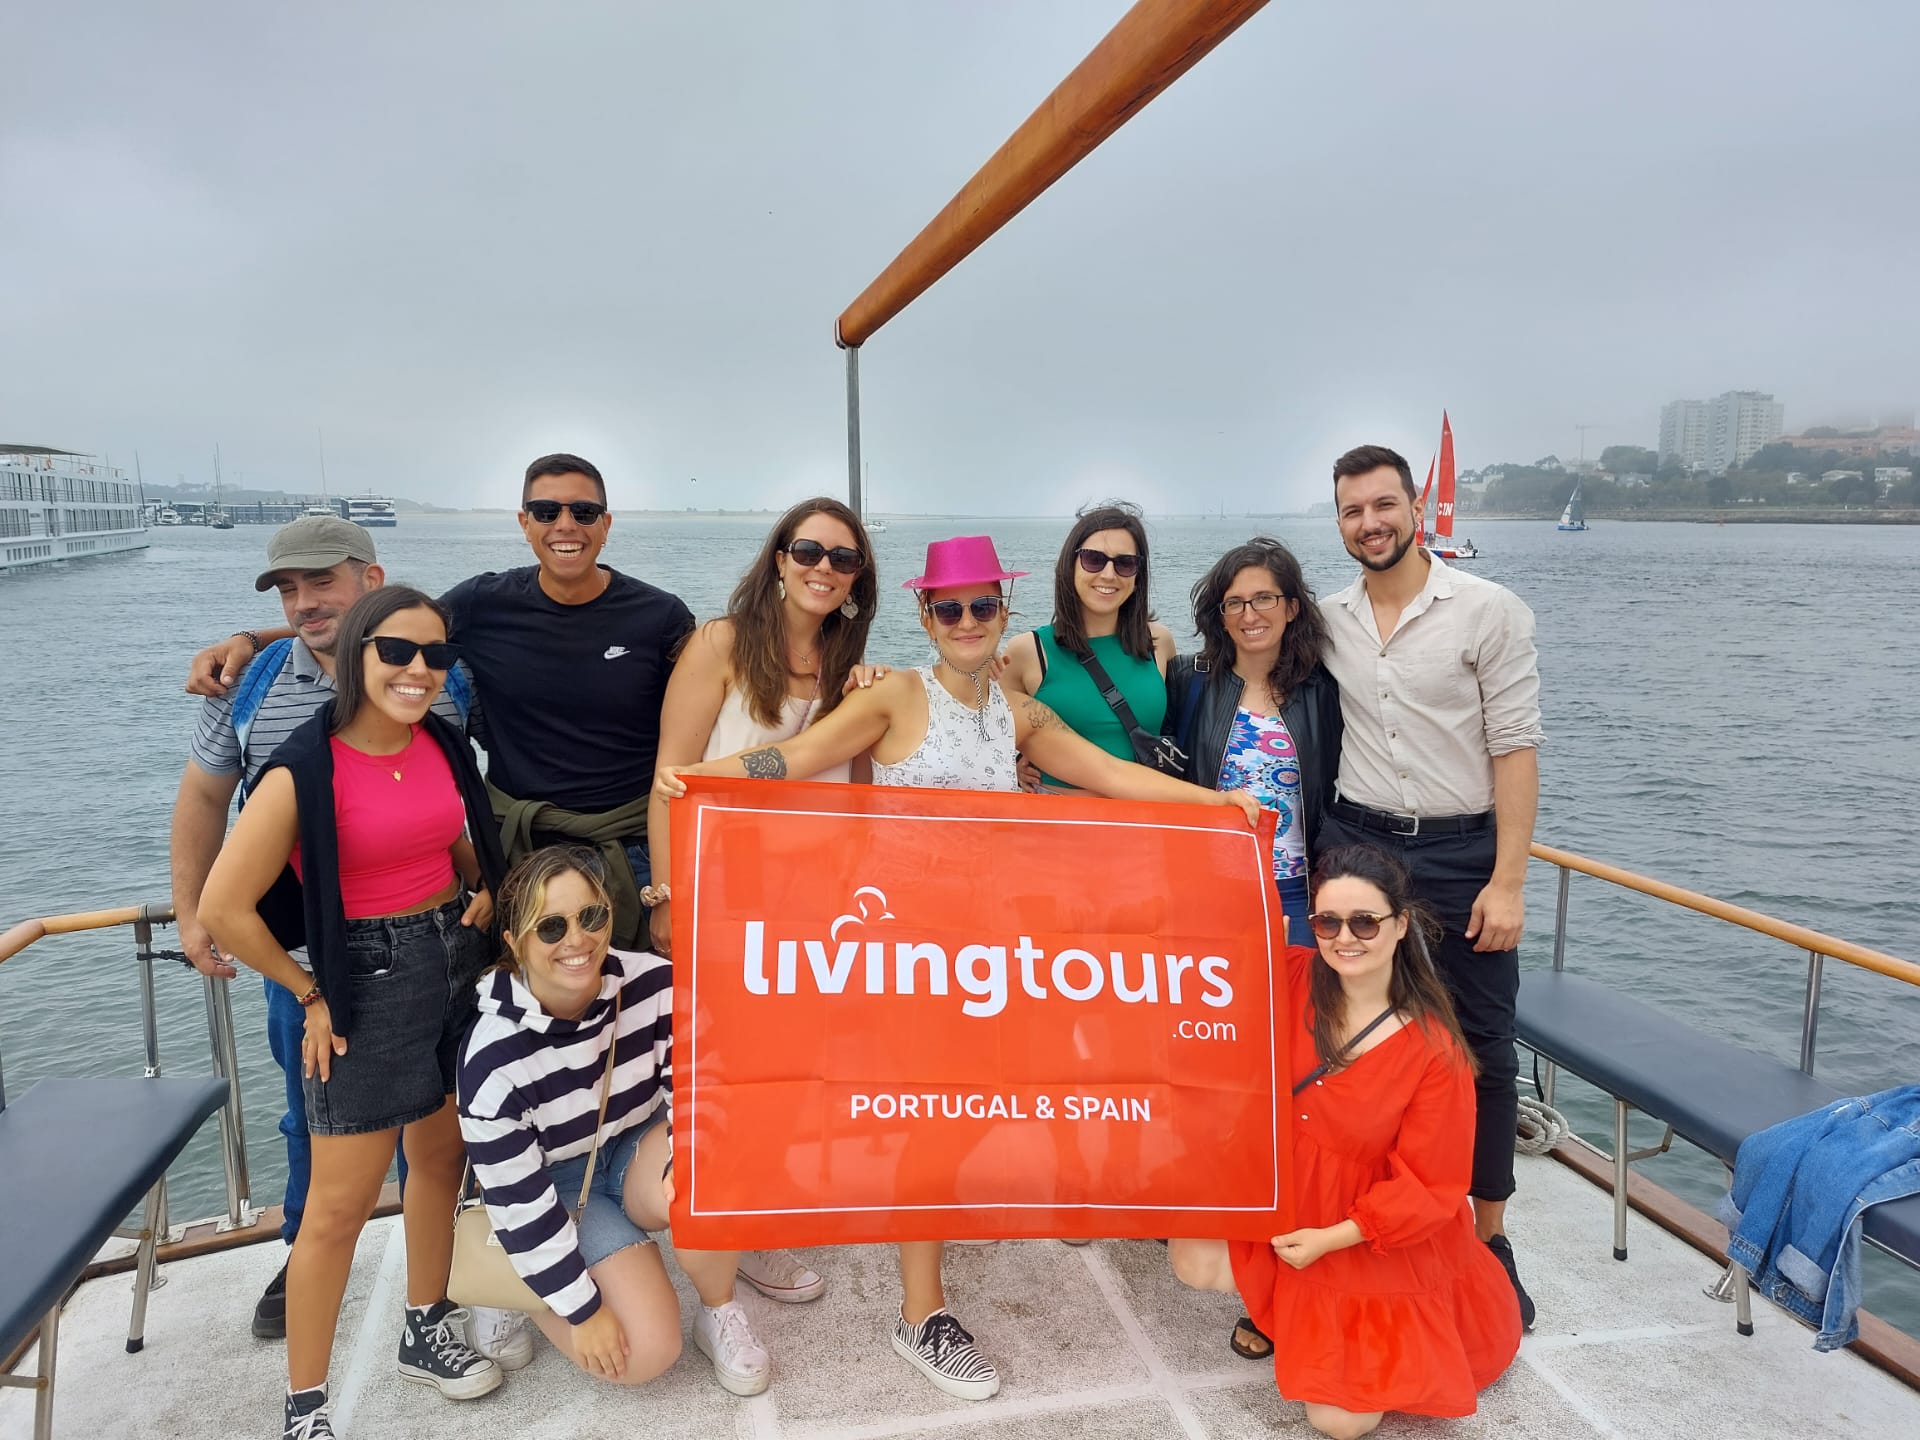 Bachelor Party in the Douro River - Living Tours